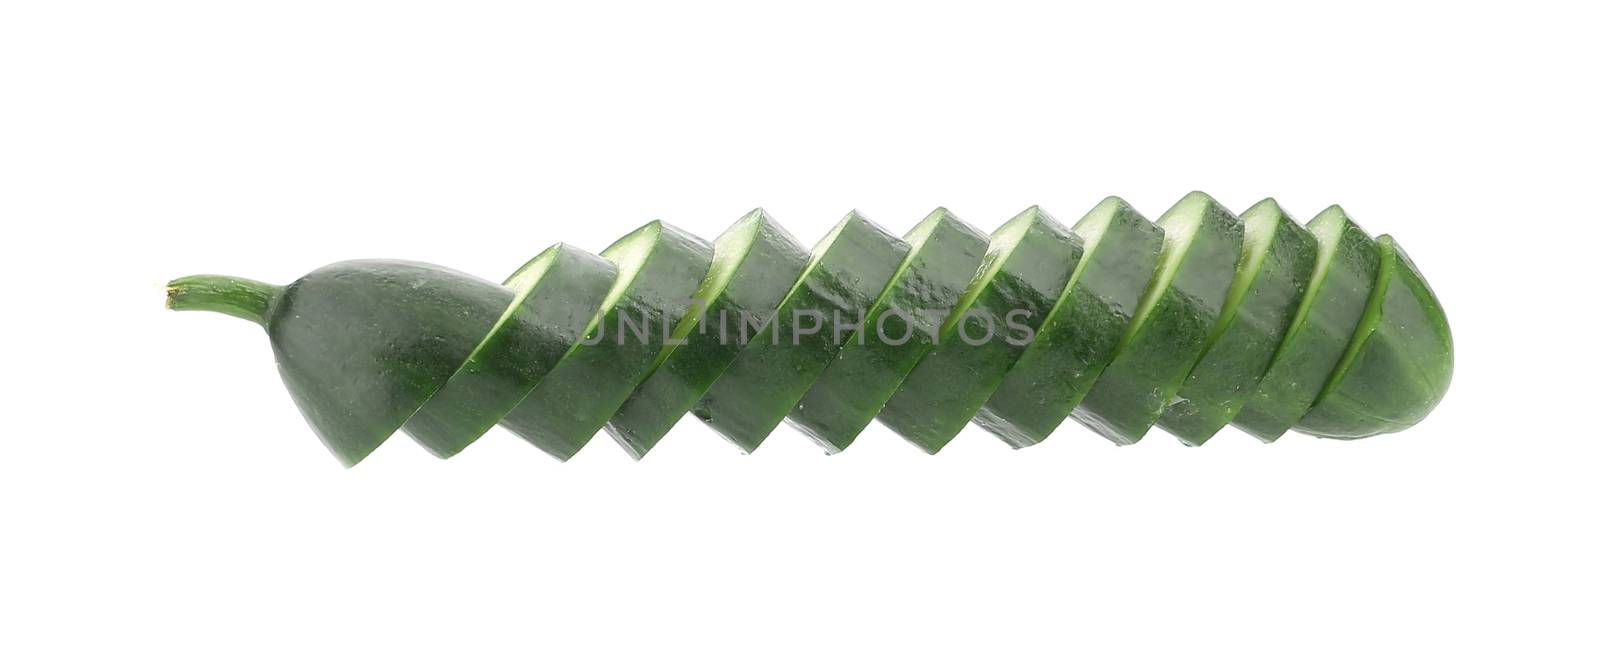 Slices of cucmber. Isolated on a white background.